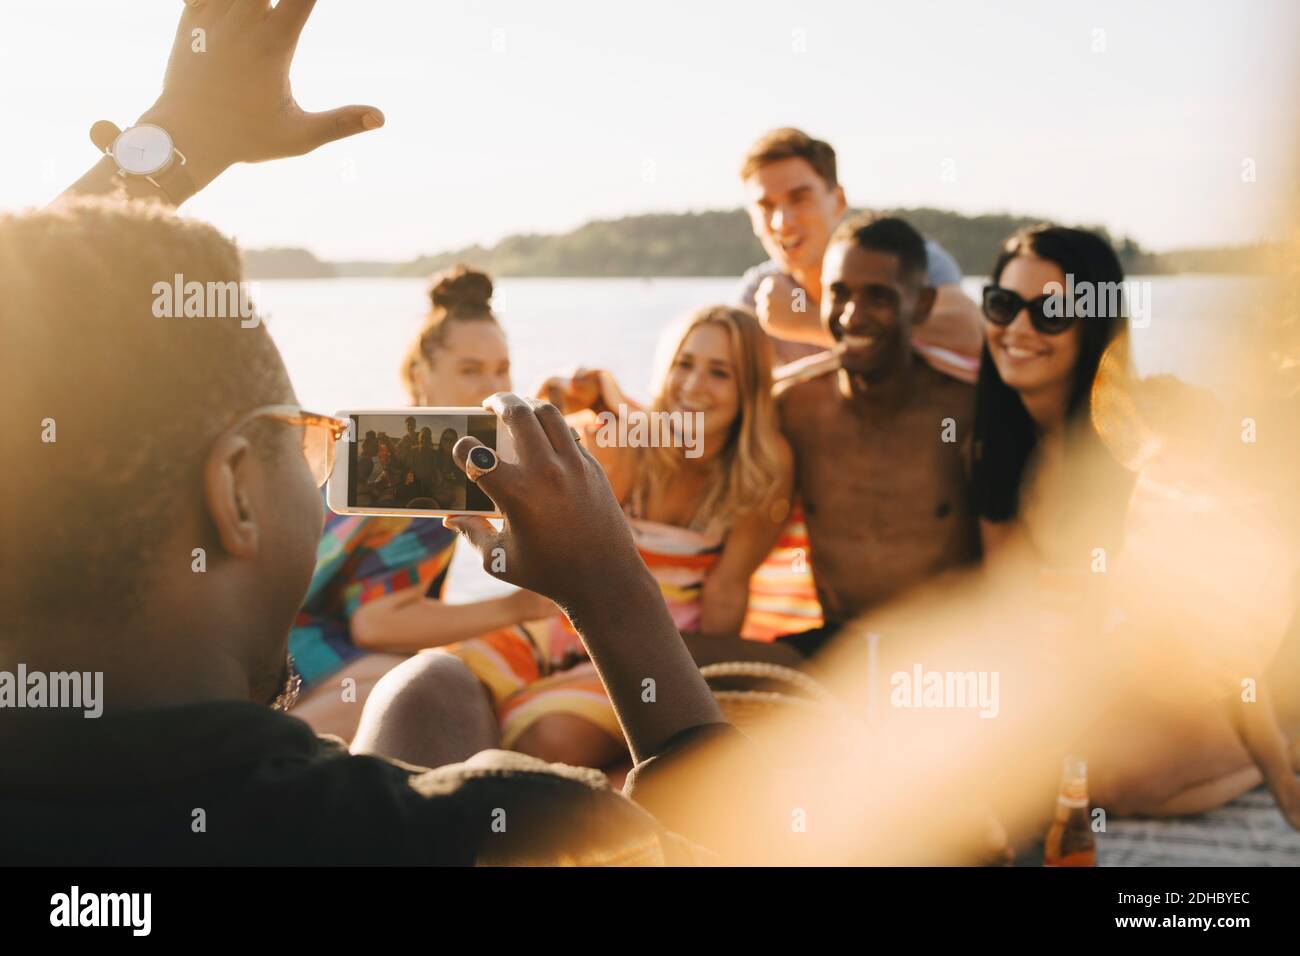 Man photographing cheerful friends on mobile phone at jetty during summer Stock Photo